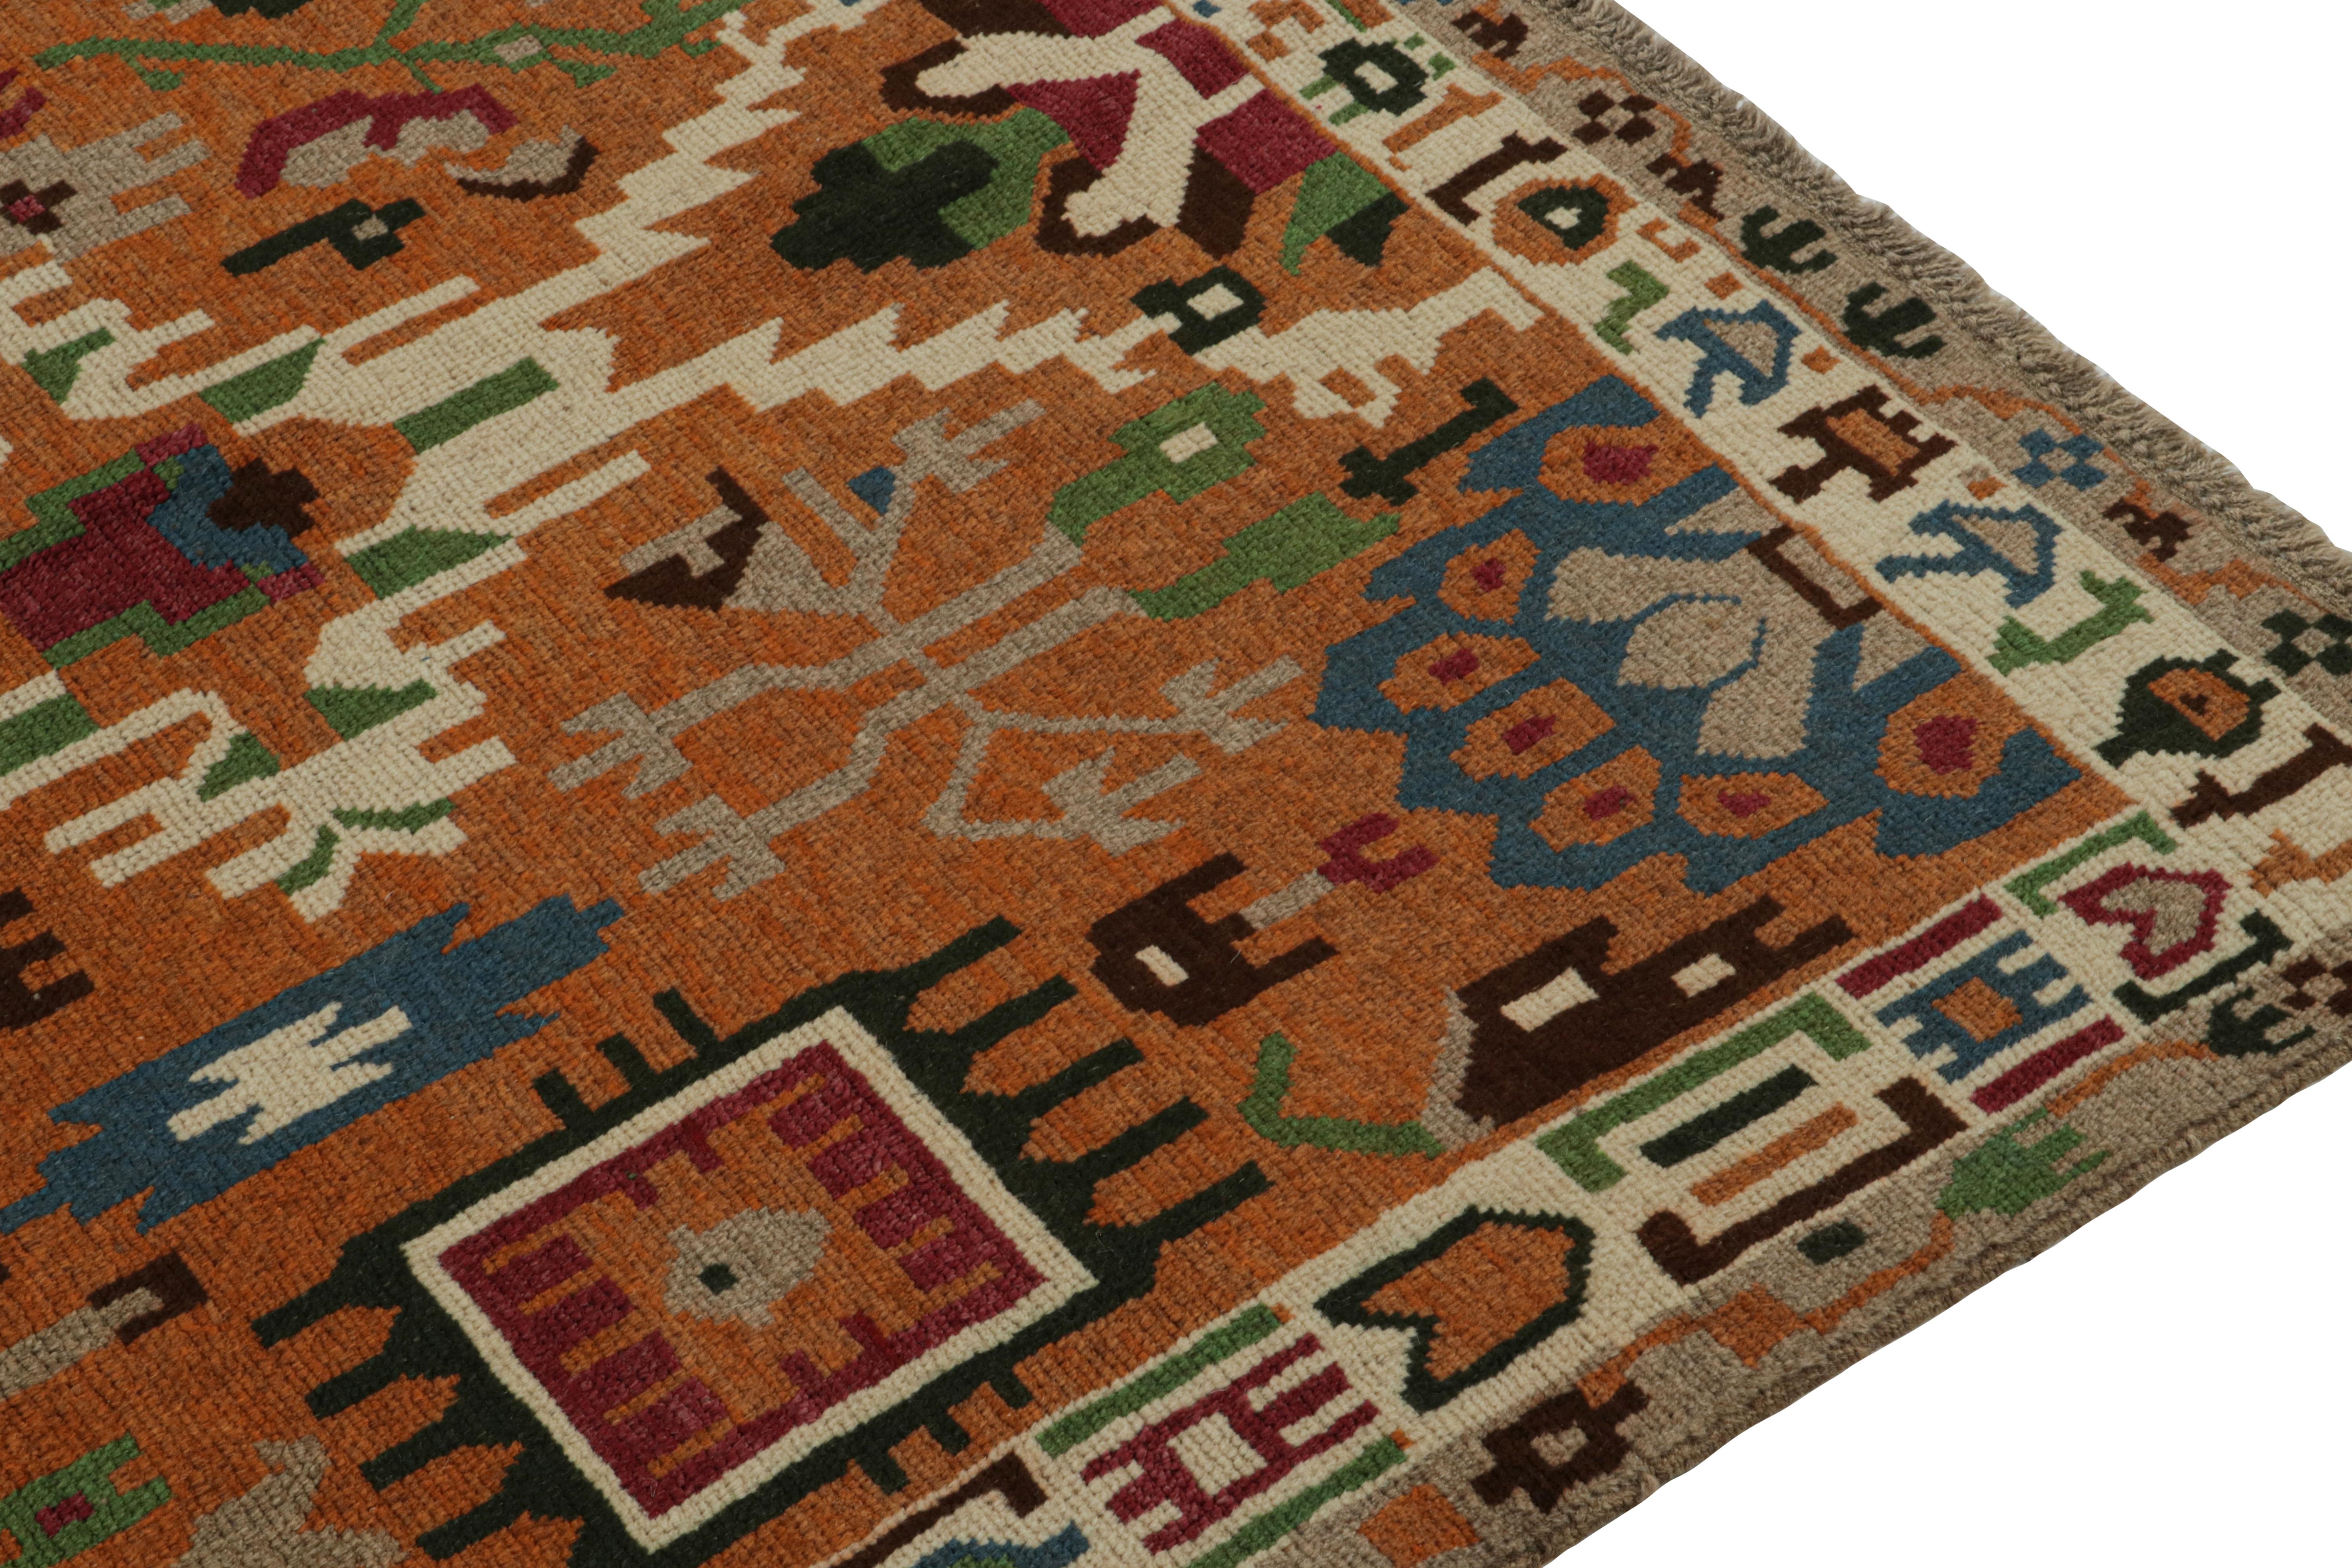 Hand-Knotted Rug & Kilim’s Oushak style rug in Orange with Colorful Geometric Patterns For Sale